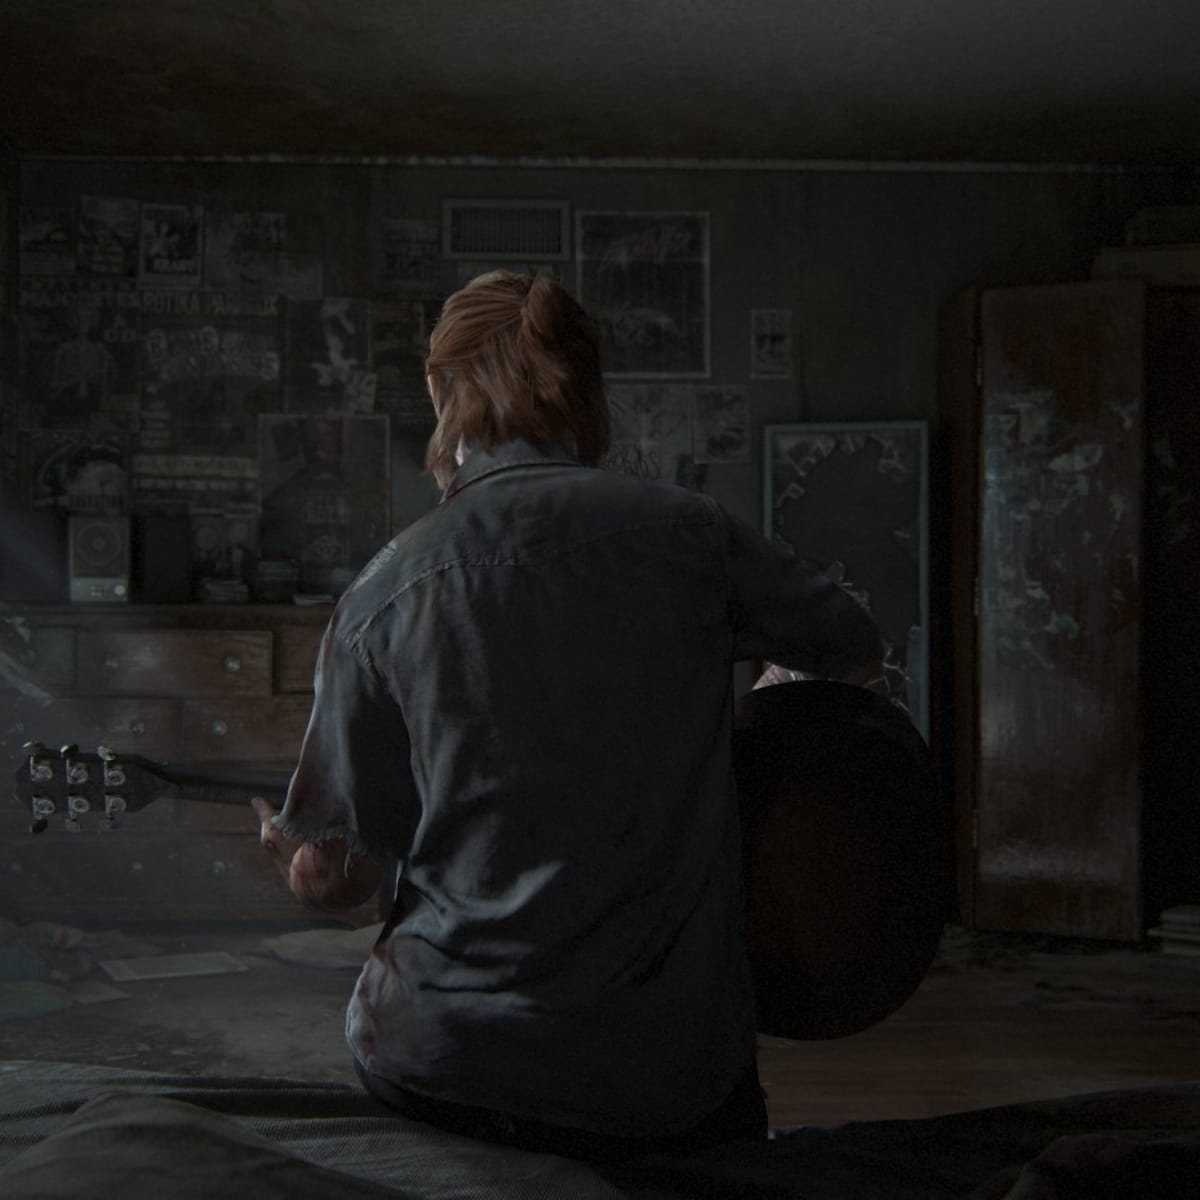 The Last of Us Part 2 Review in 2022: How Has It Held Up in Two